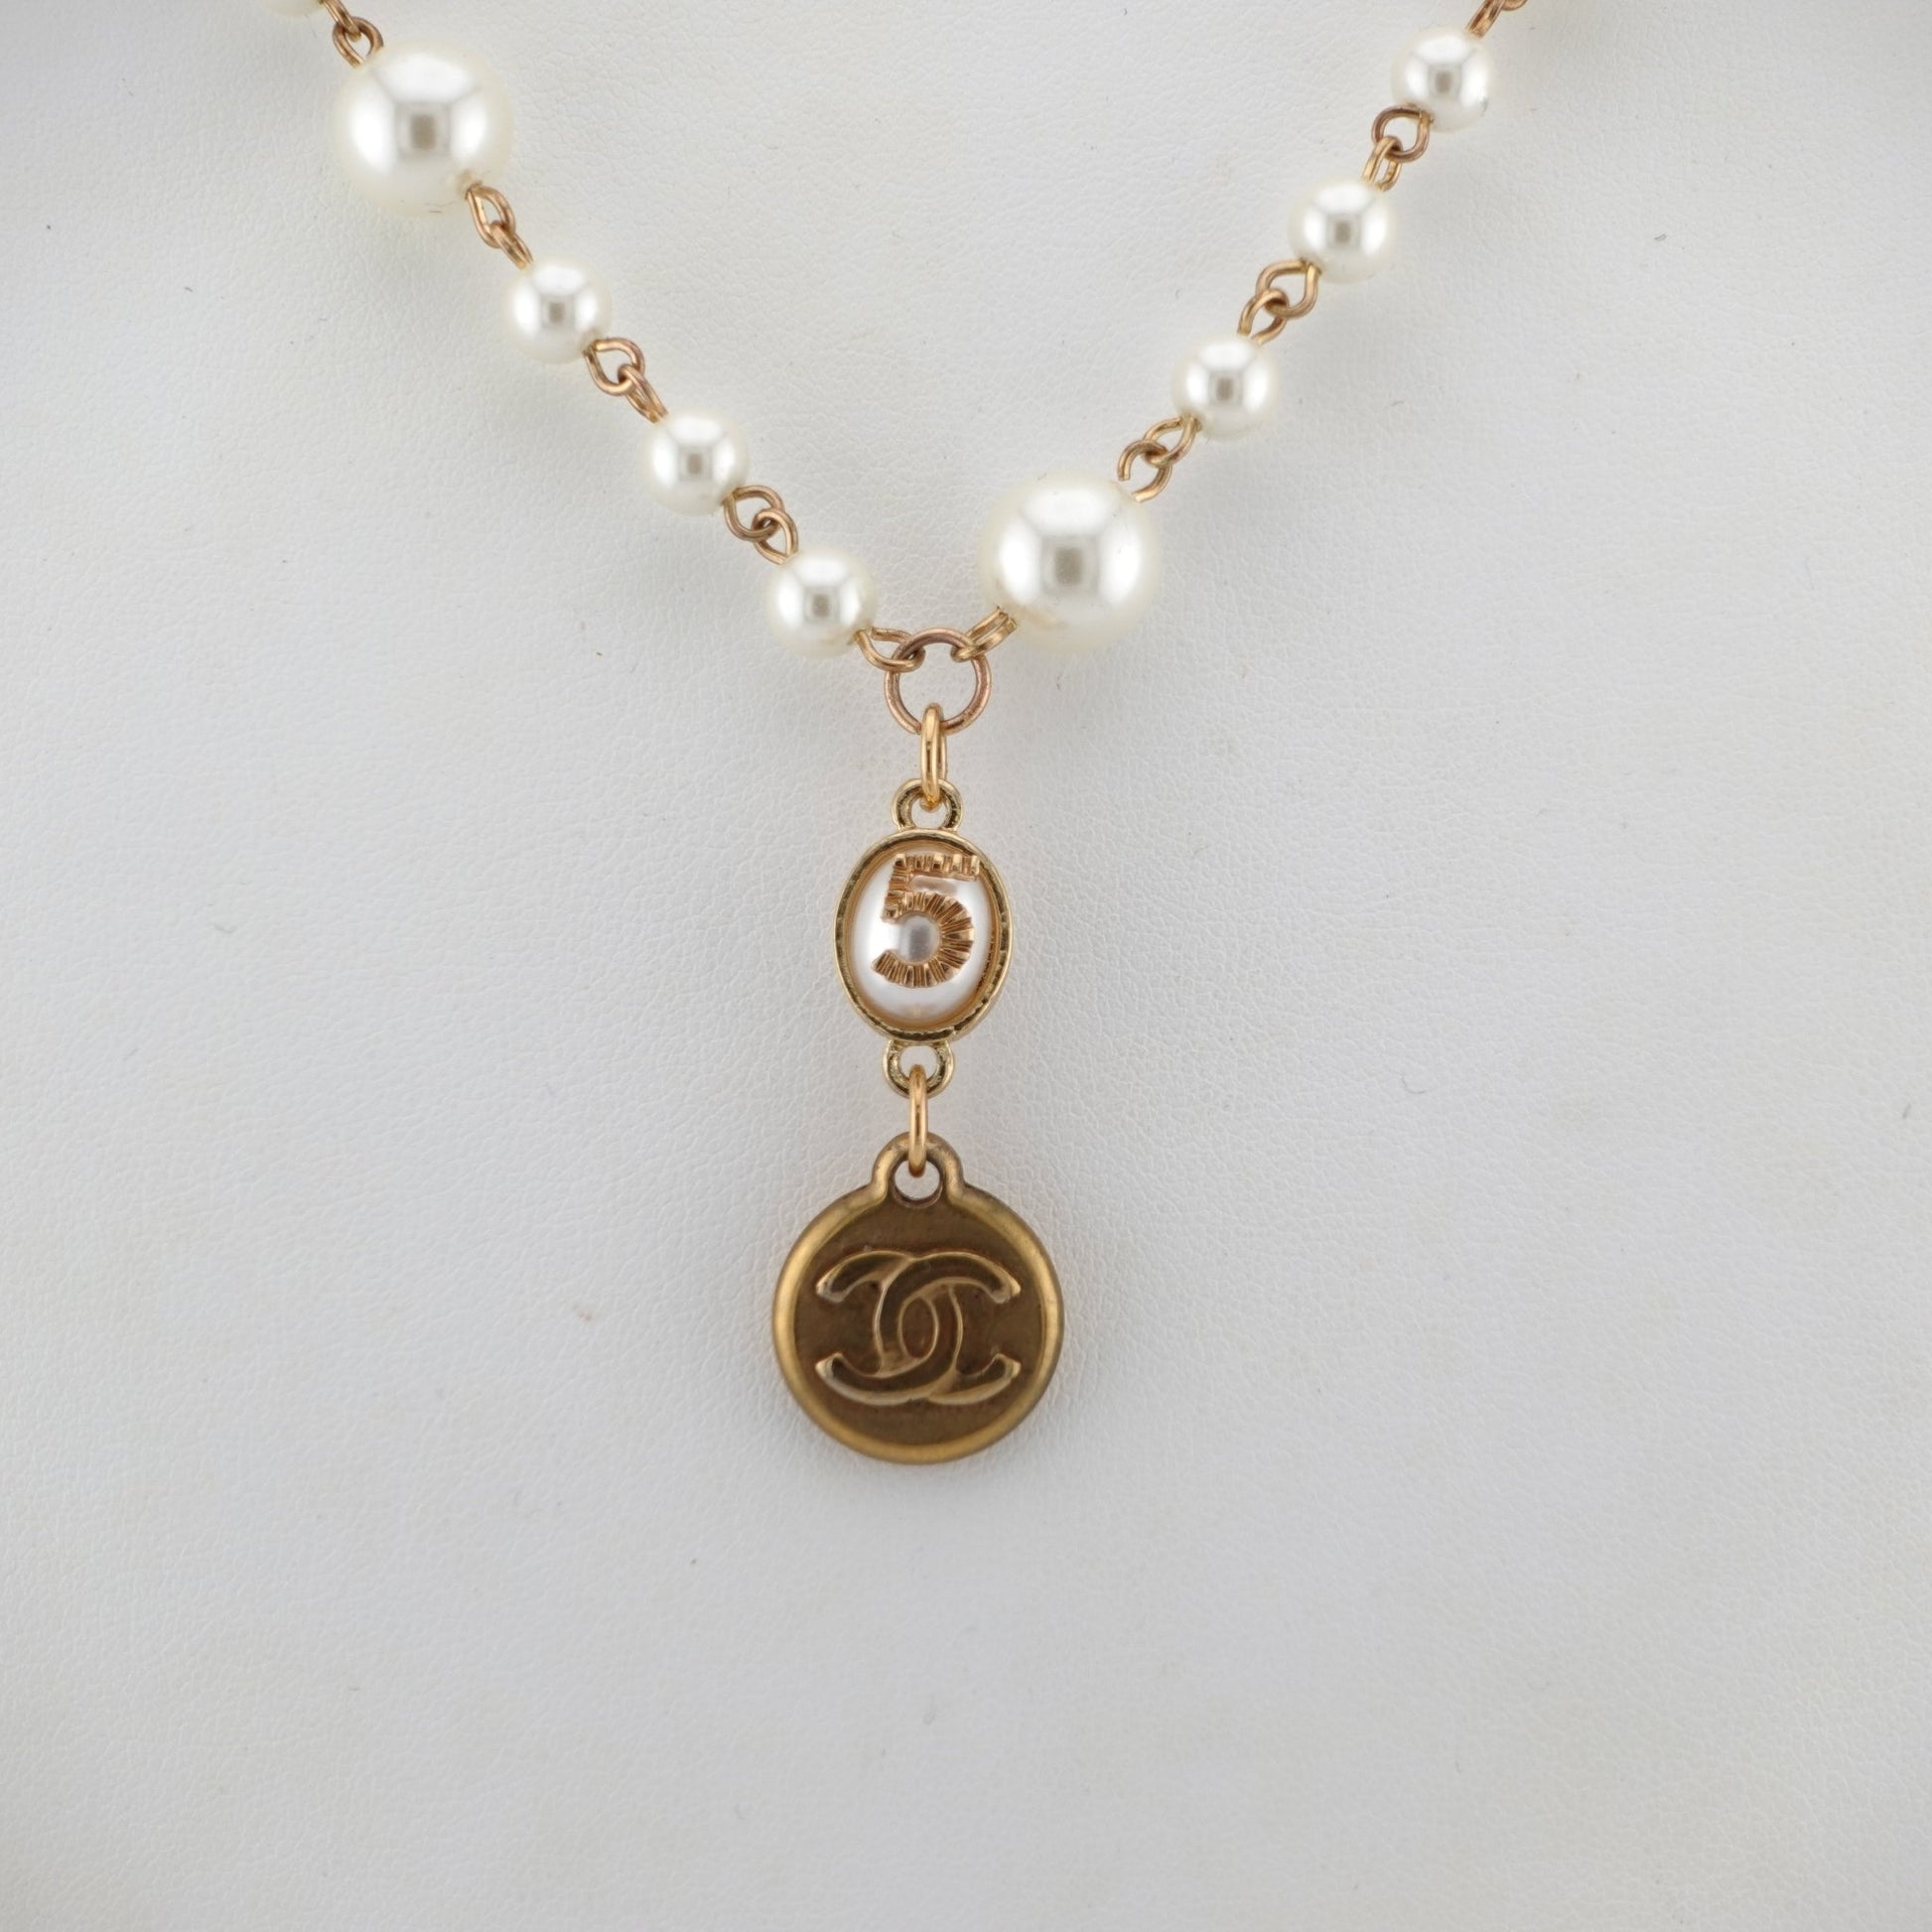 CHANEL Gold CC Logo Charm on Faux Pearl Necklace - Bag Envy